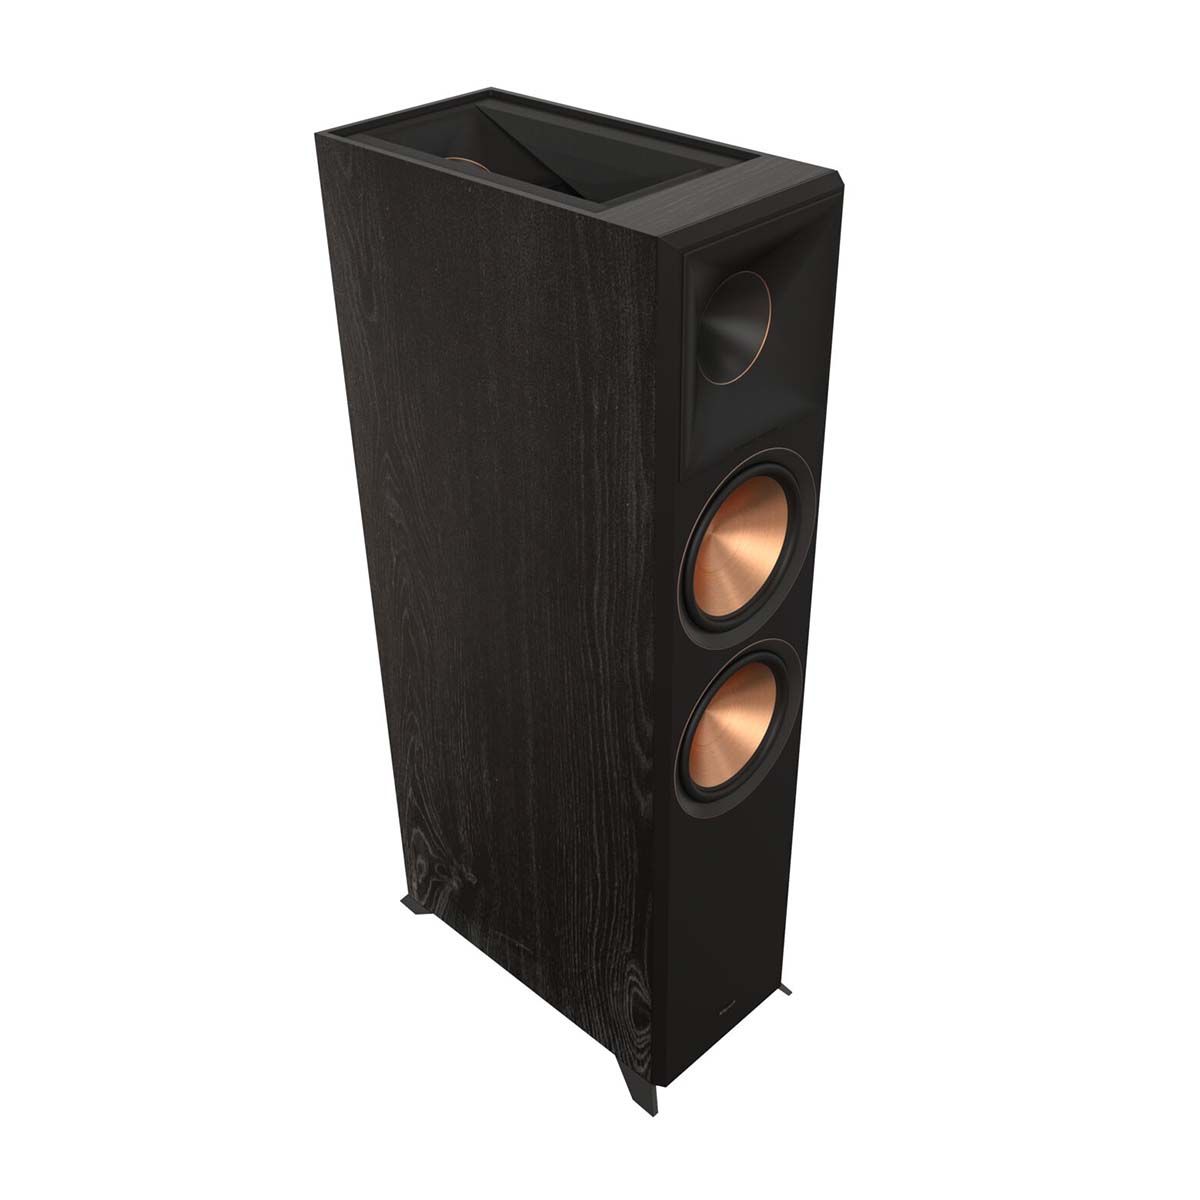 Klipsch RP-8060FA II Dolby Atmos Floorstanding Speaker - Ebony - angled front view without grill